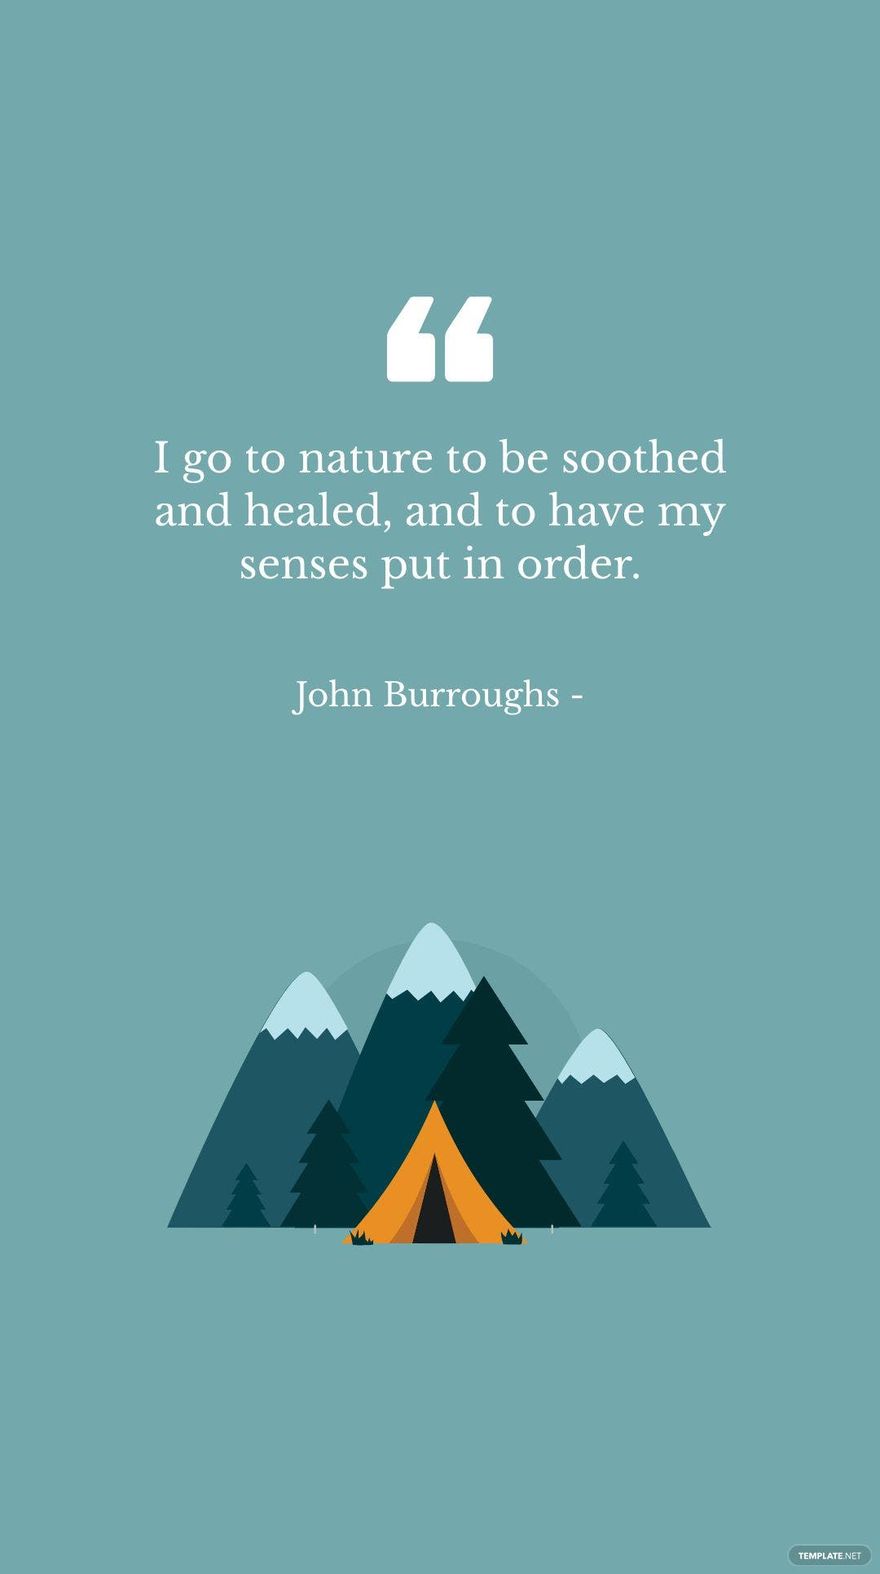 John Burroughs - I go to nature to be soothed and healed, and to have my senses put in order.